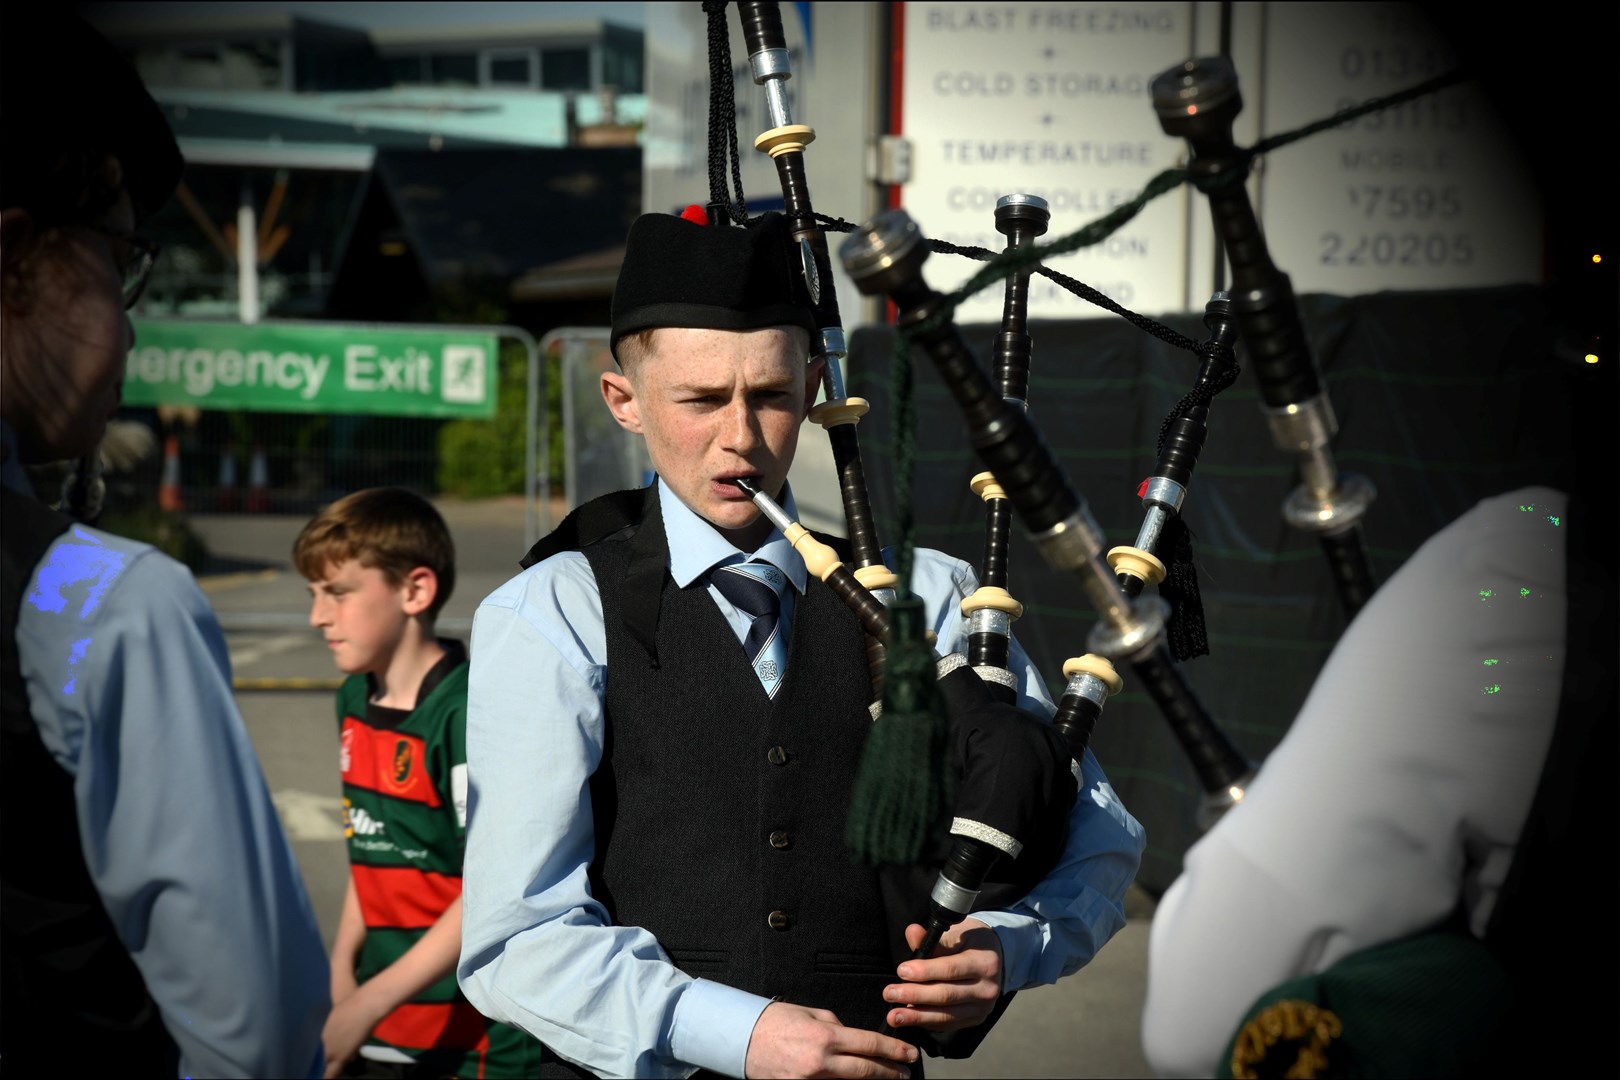 A member of the City of Inverness Youth Pipe Band. Picture: James Mackenzie